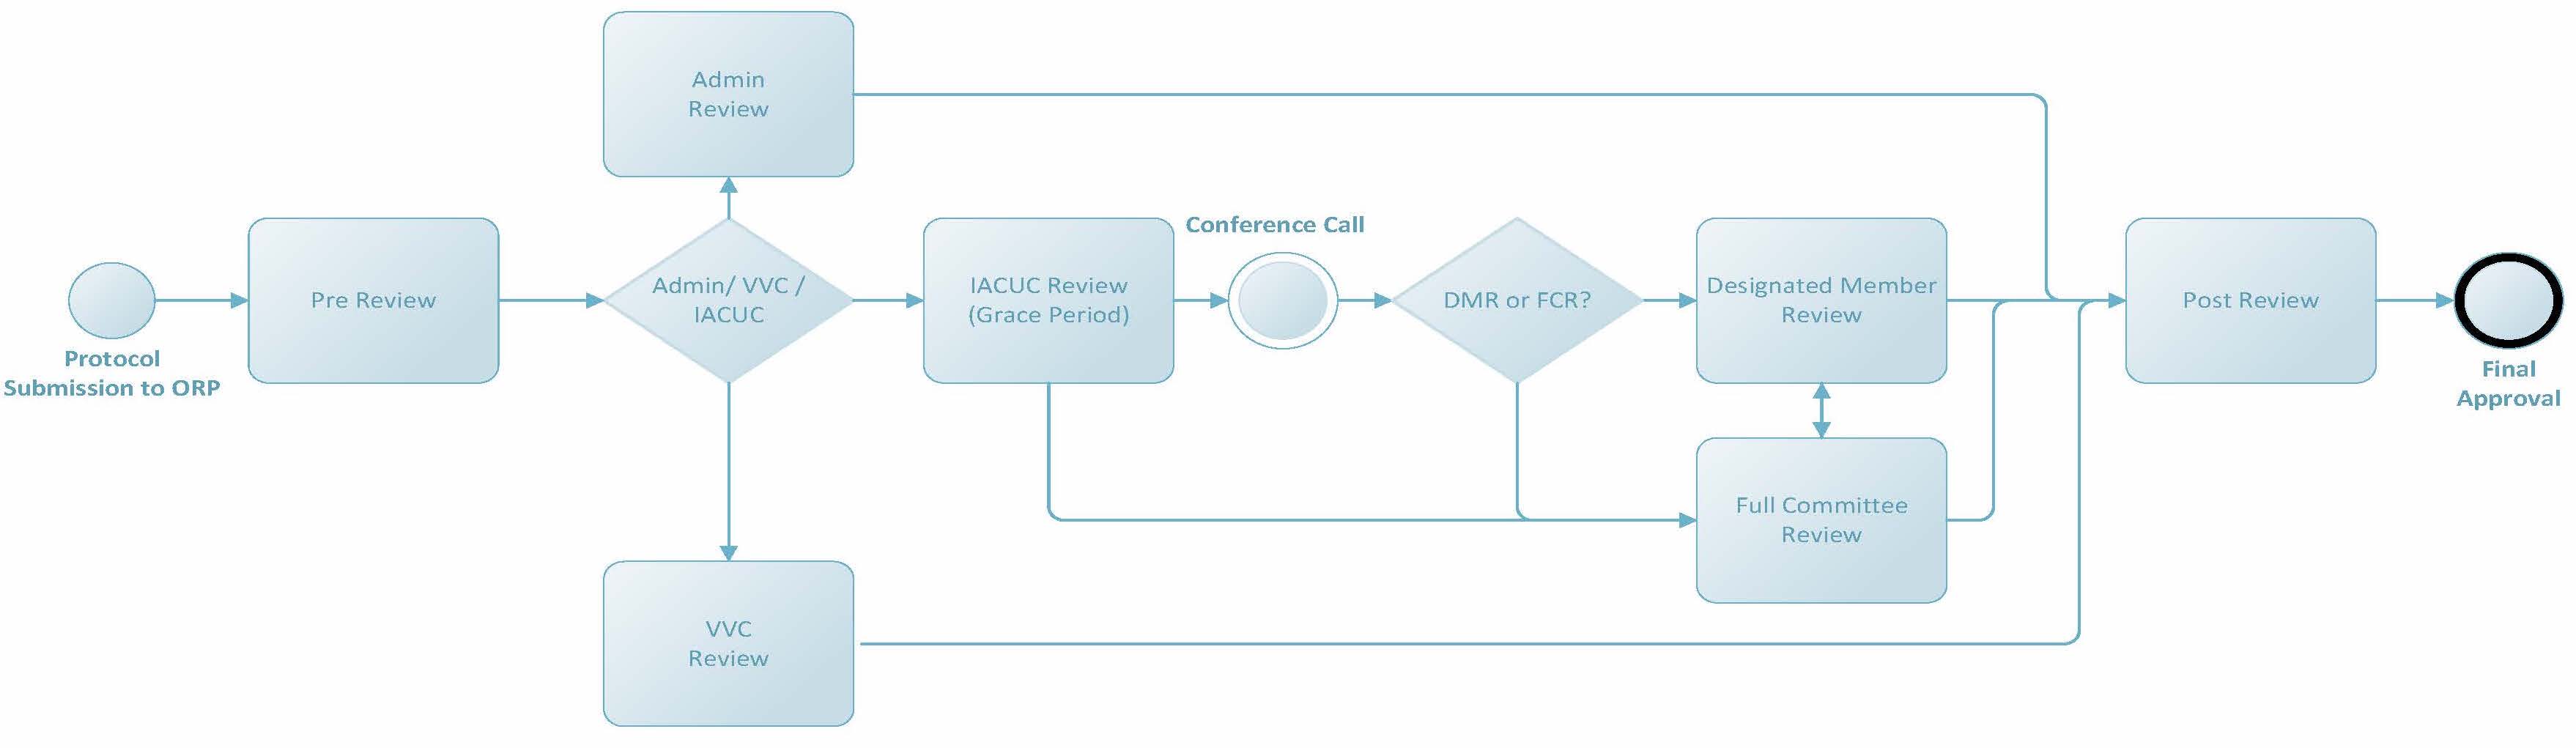 IACUC Review Process Map - Complete Process.jpg